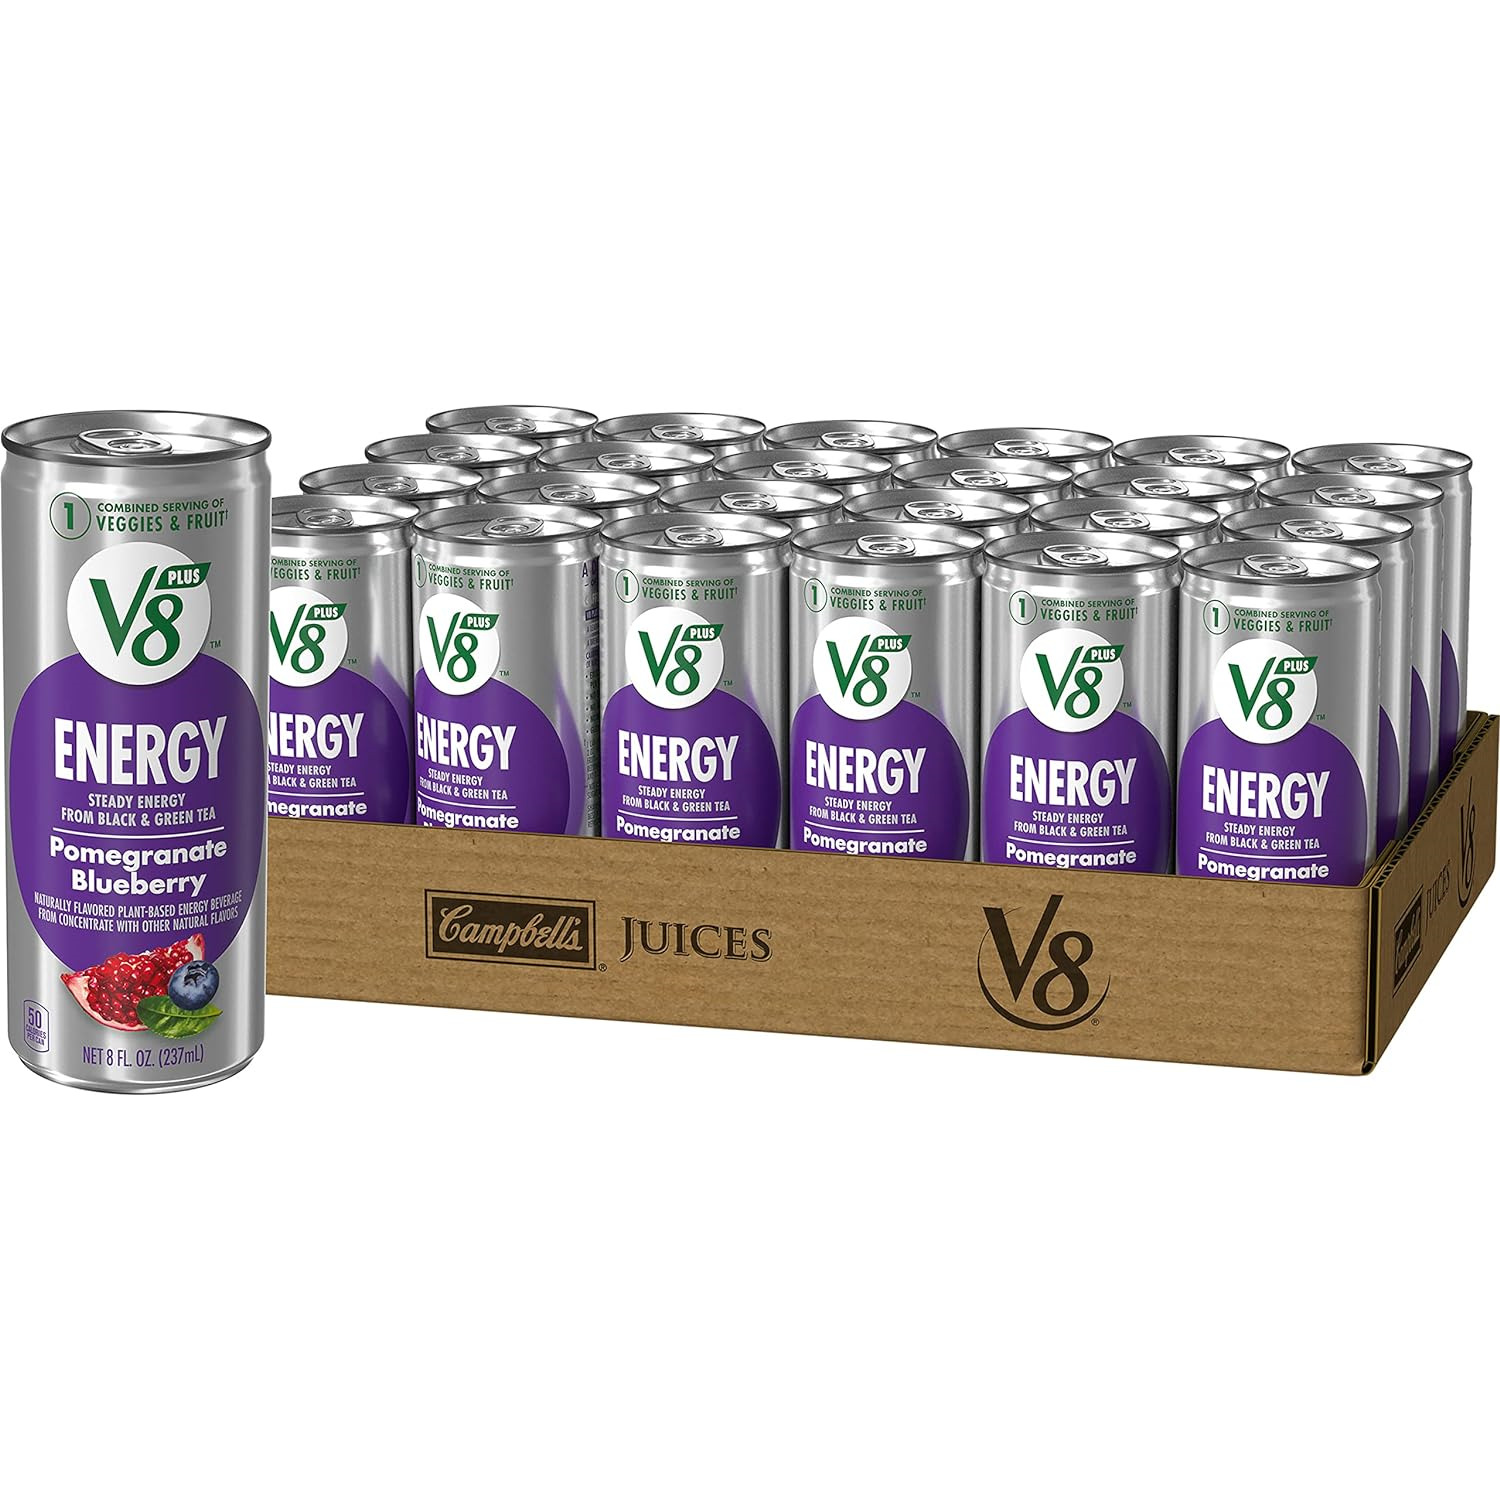 V8 +ENERGY Pomegranate Blueberry Energy Drink, Made With Real Vegetable And 8 of